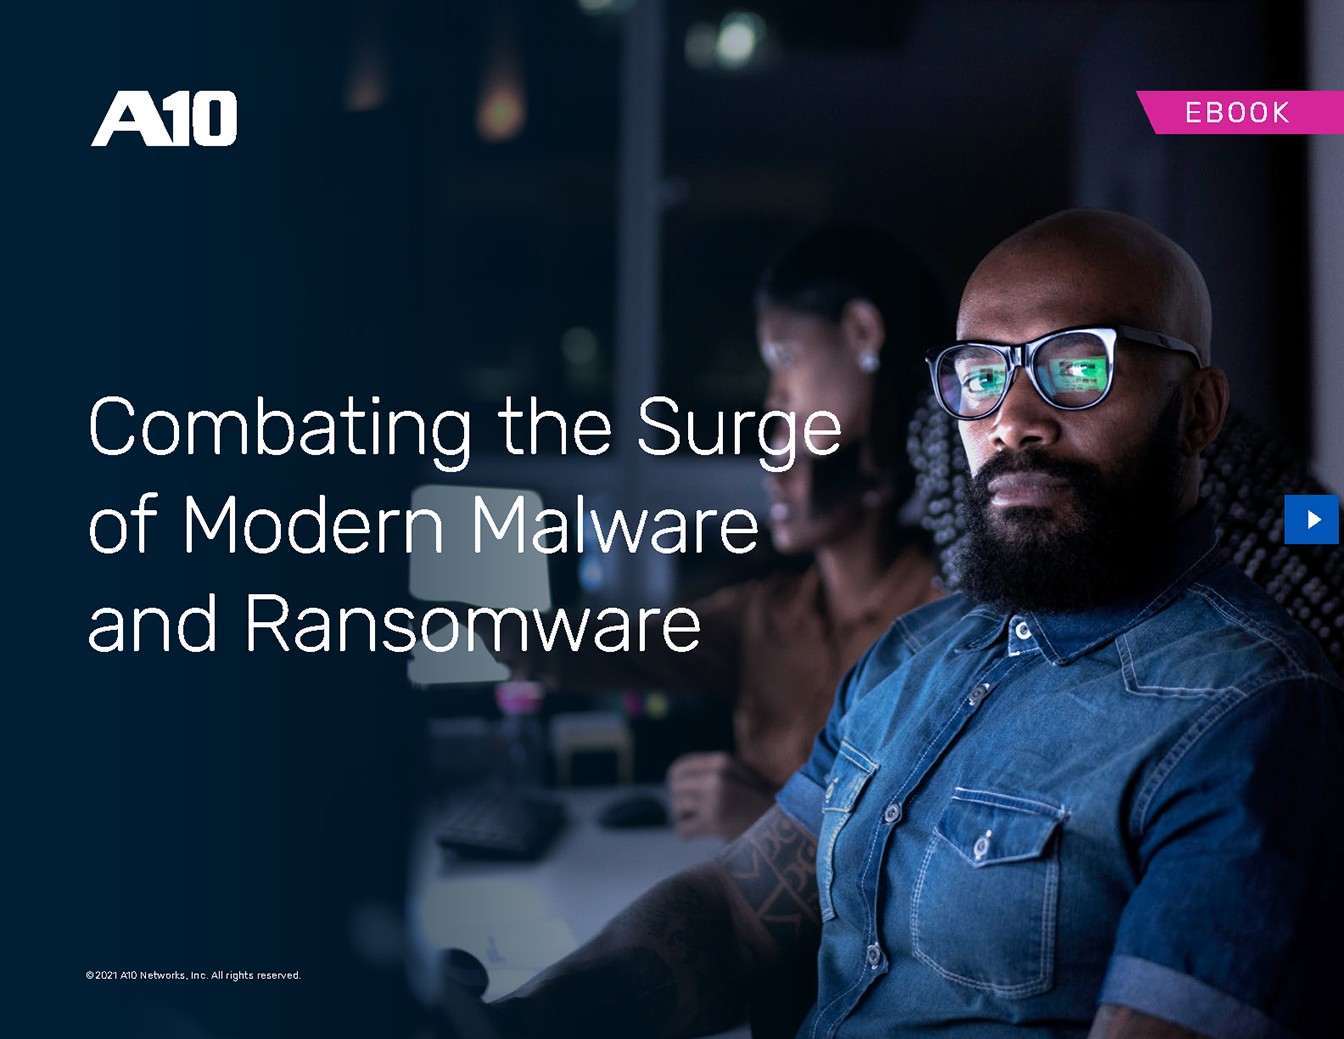 Combating the Surge of Modern Malware and Ransomware